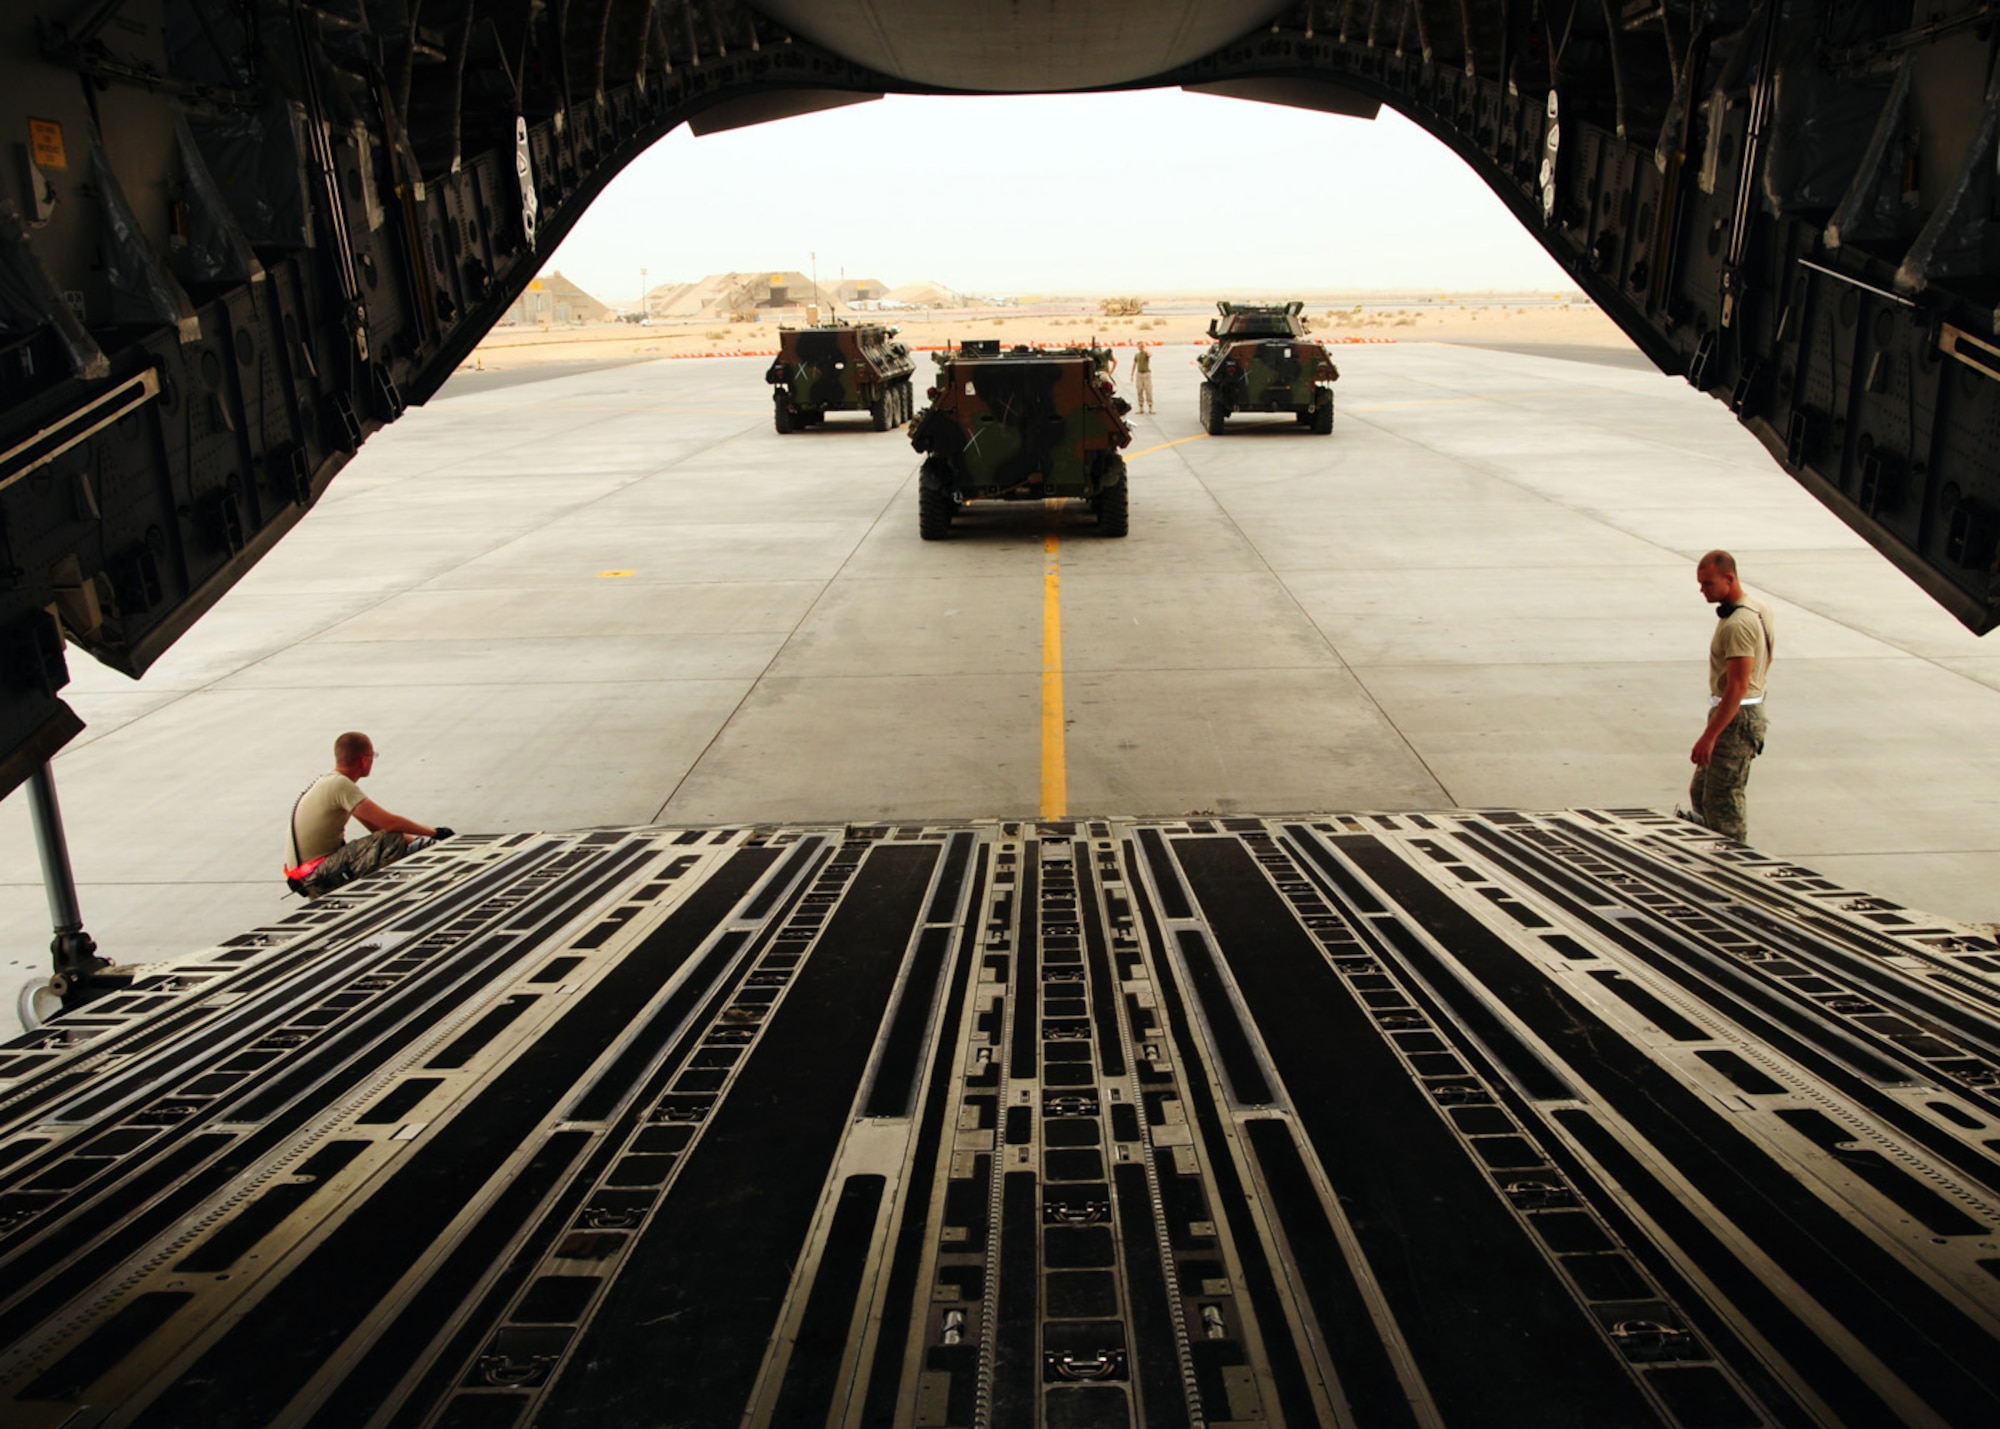 SOUTHWEST ASIA -- Three United States Marine Corp Light Armored Vehicles are backed onto a C-17 Globemaster at an air base in Southwest Asia, May 6. The 386th Air Expeditionary Wing is assisting the 2nd Marine Expeditionary Brigade with moving their supplies into Afghanistan. (U.S. Air Force photo/ Senior Airman Courtney Richardson)